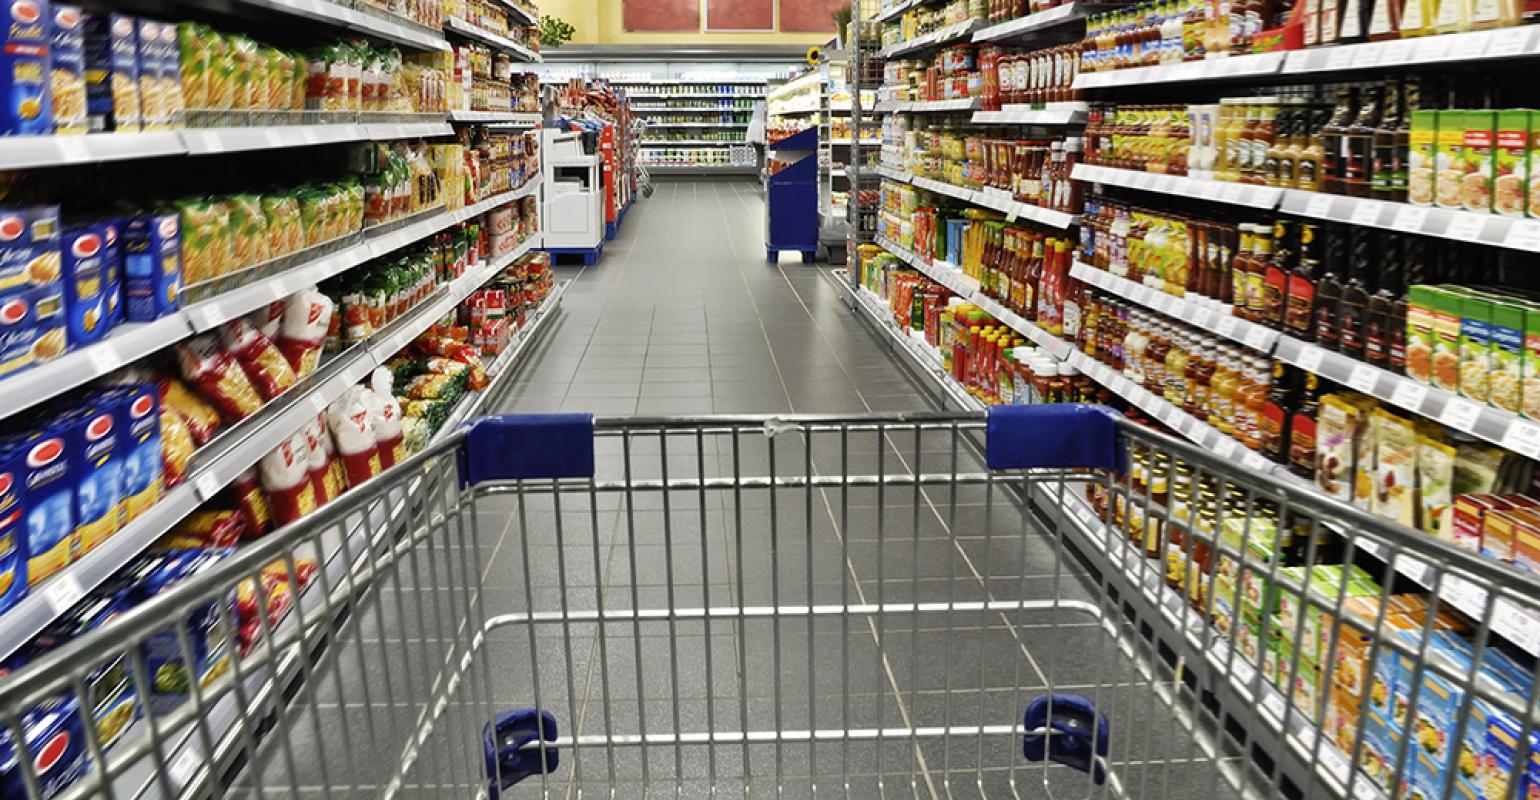 busyconsumers 0 - Grocery Shopping Tidbits That Makes Shopping Better